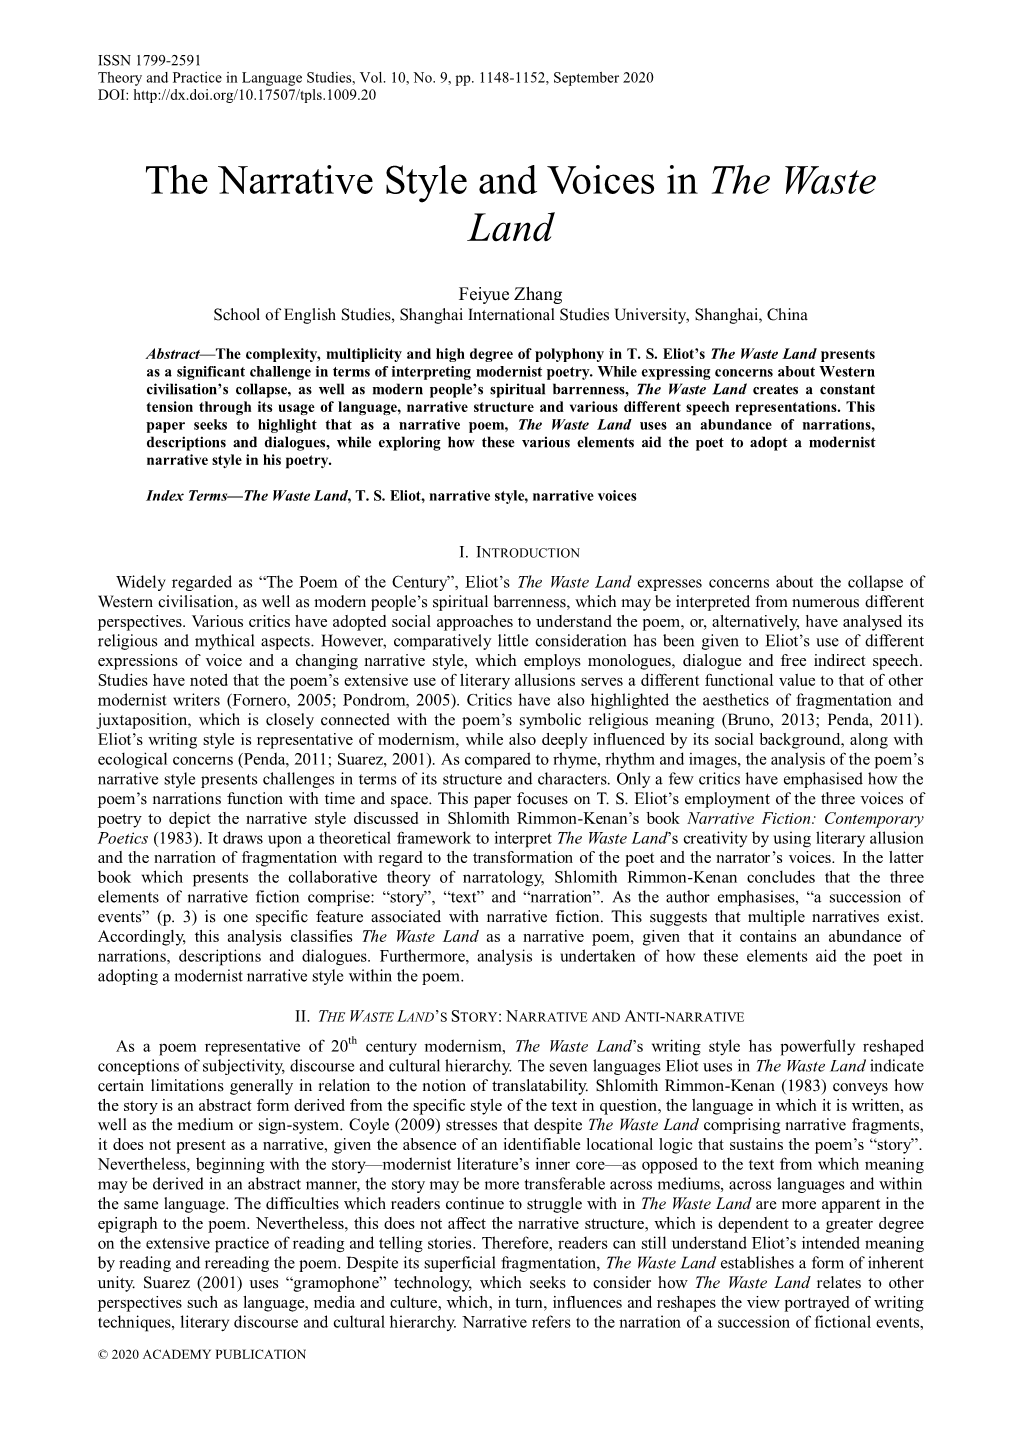 The Narrative Style and Voices in the Waste Land